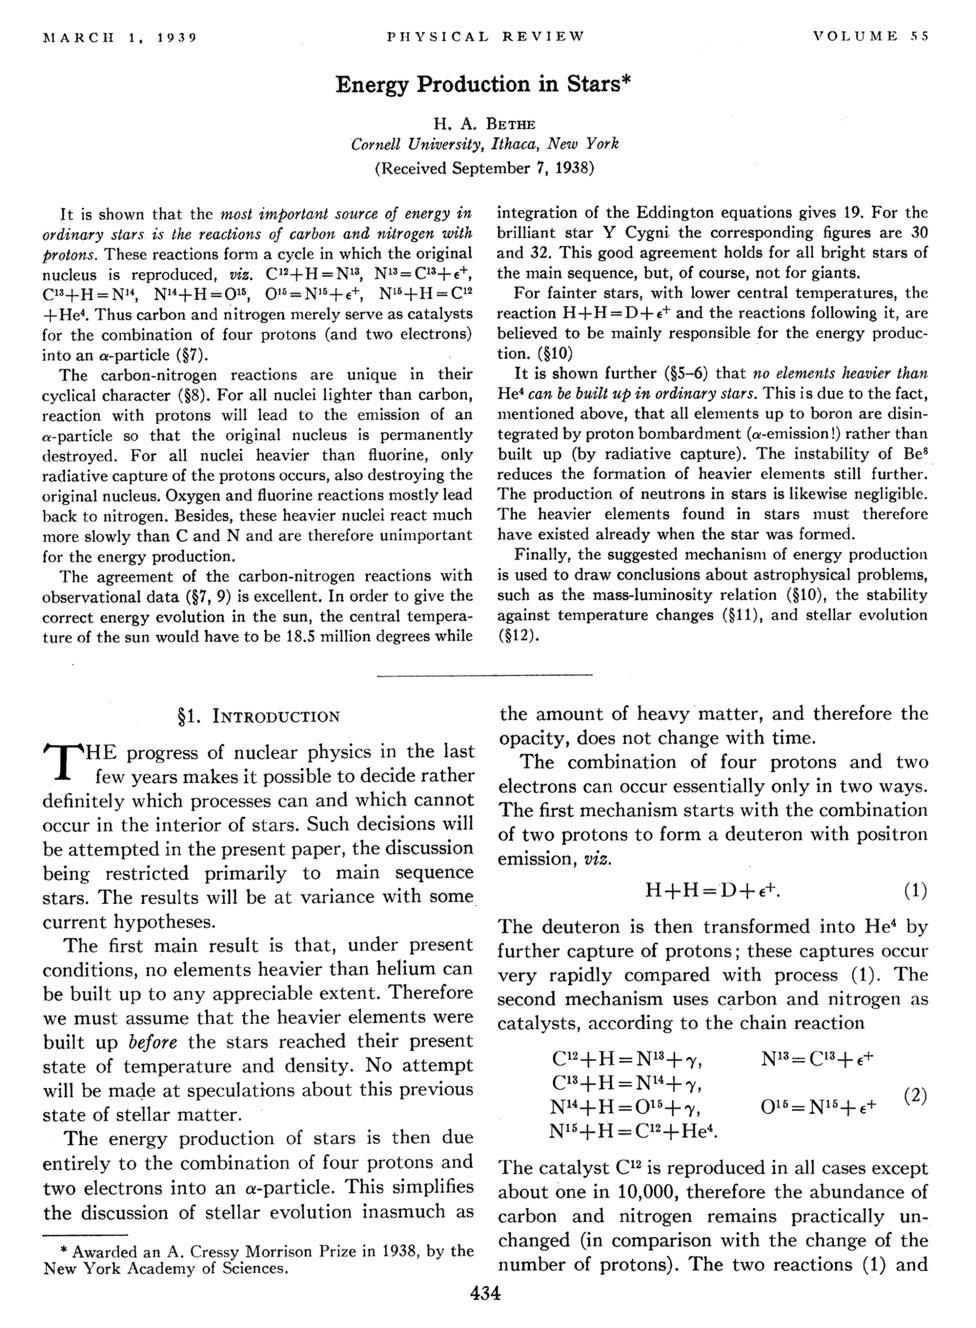 Bethe s Classic Paper on Nuclear Reactions in